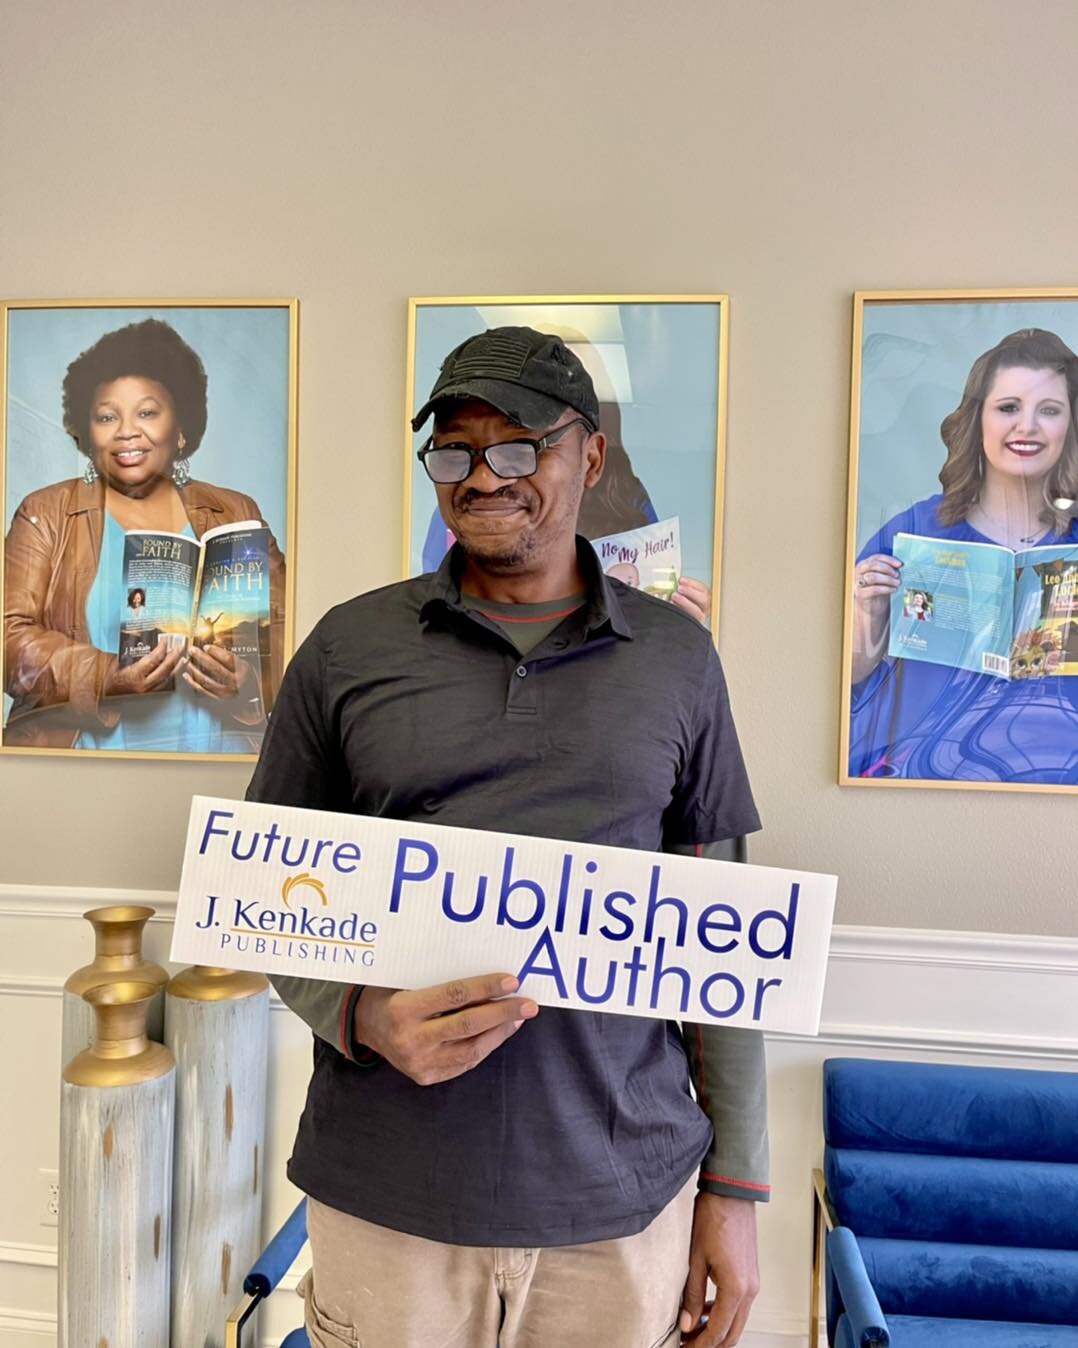 We do love our Authors!
Help us welcome our new Future Author!
Be on the lookout for his new self-help book on entrepreneurship! 🎉

It was truly a pleasure meeting him. Amazing soul!

You can get started on your author journey in person or online! ?